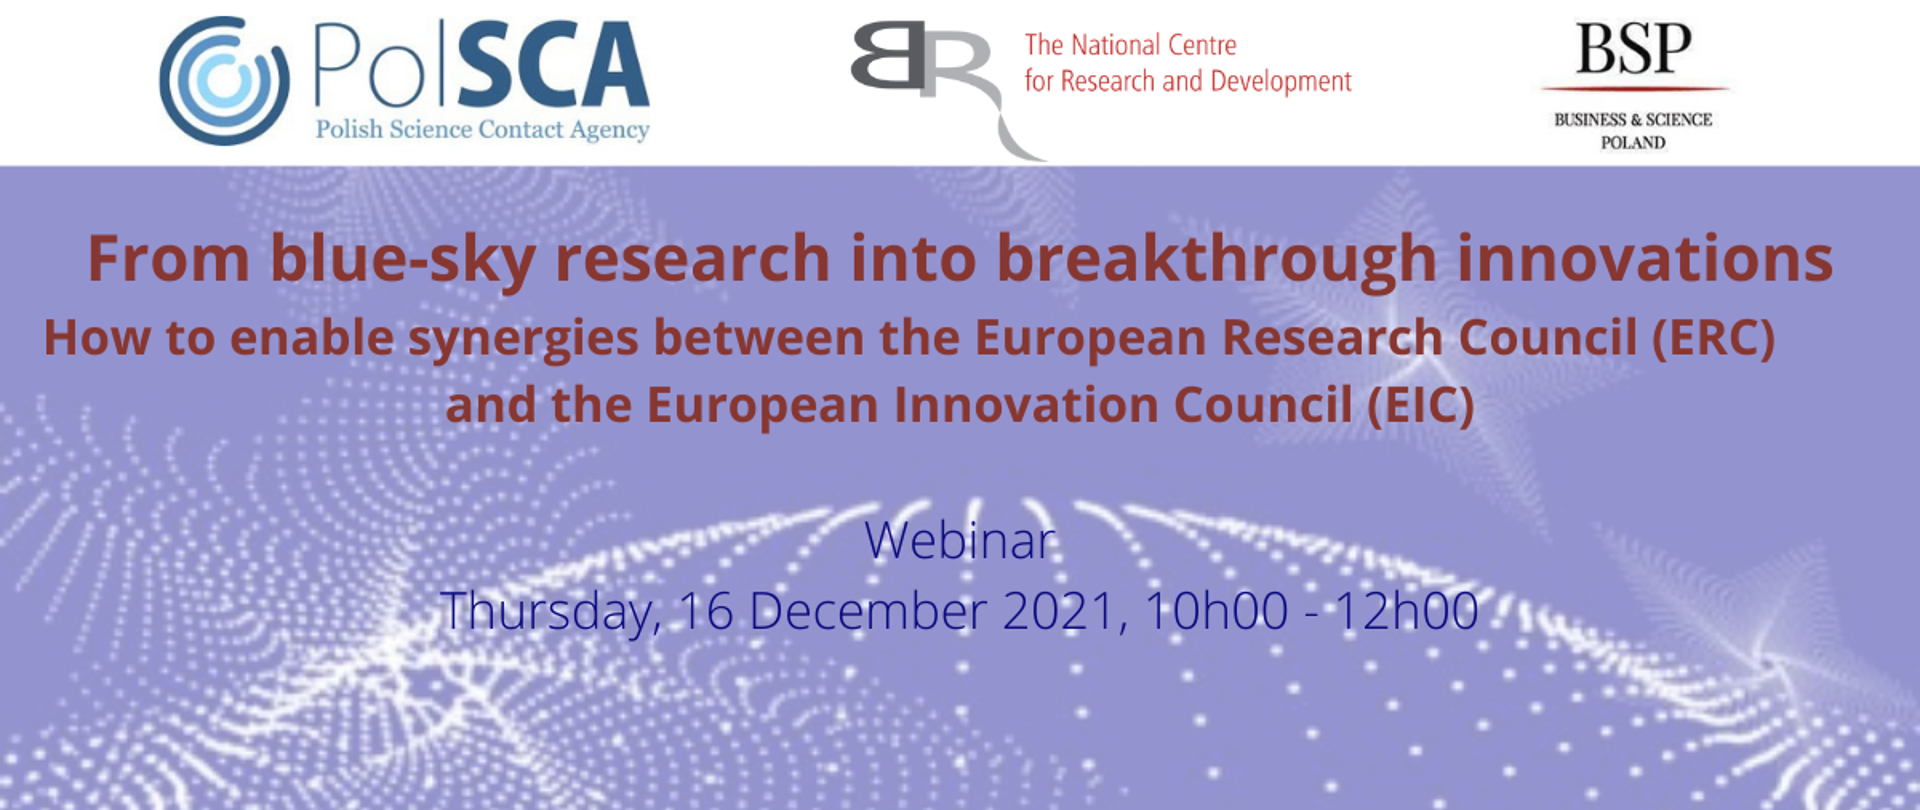 From blue-sky research into breakthrough innovations. How to enable synergies between the European Research Council (ERC) and the European Innovation Council (EIC)